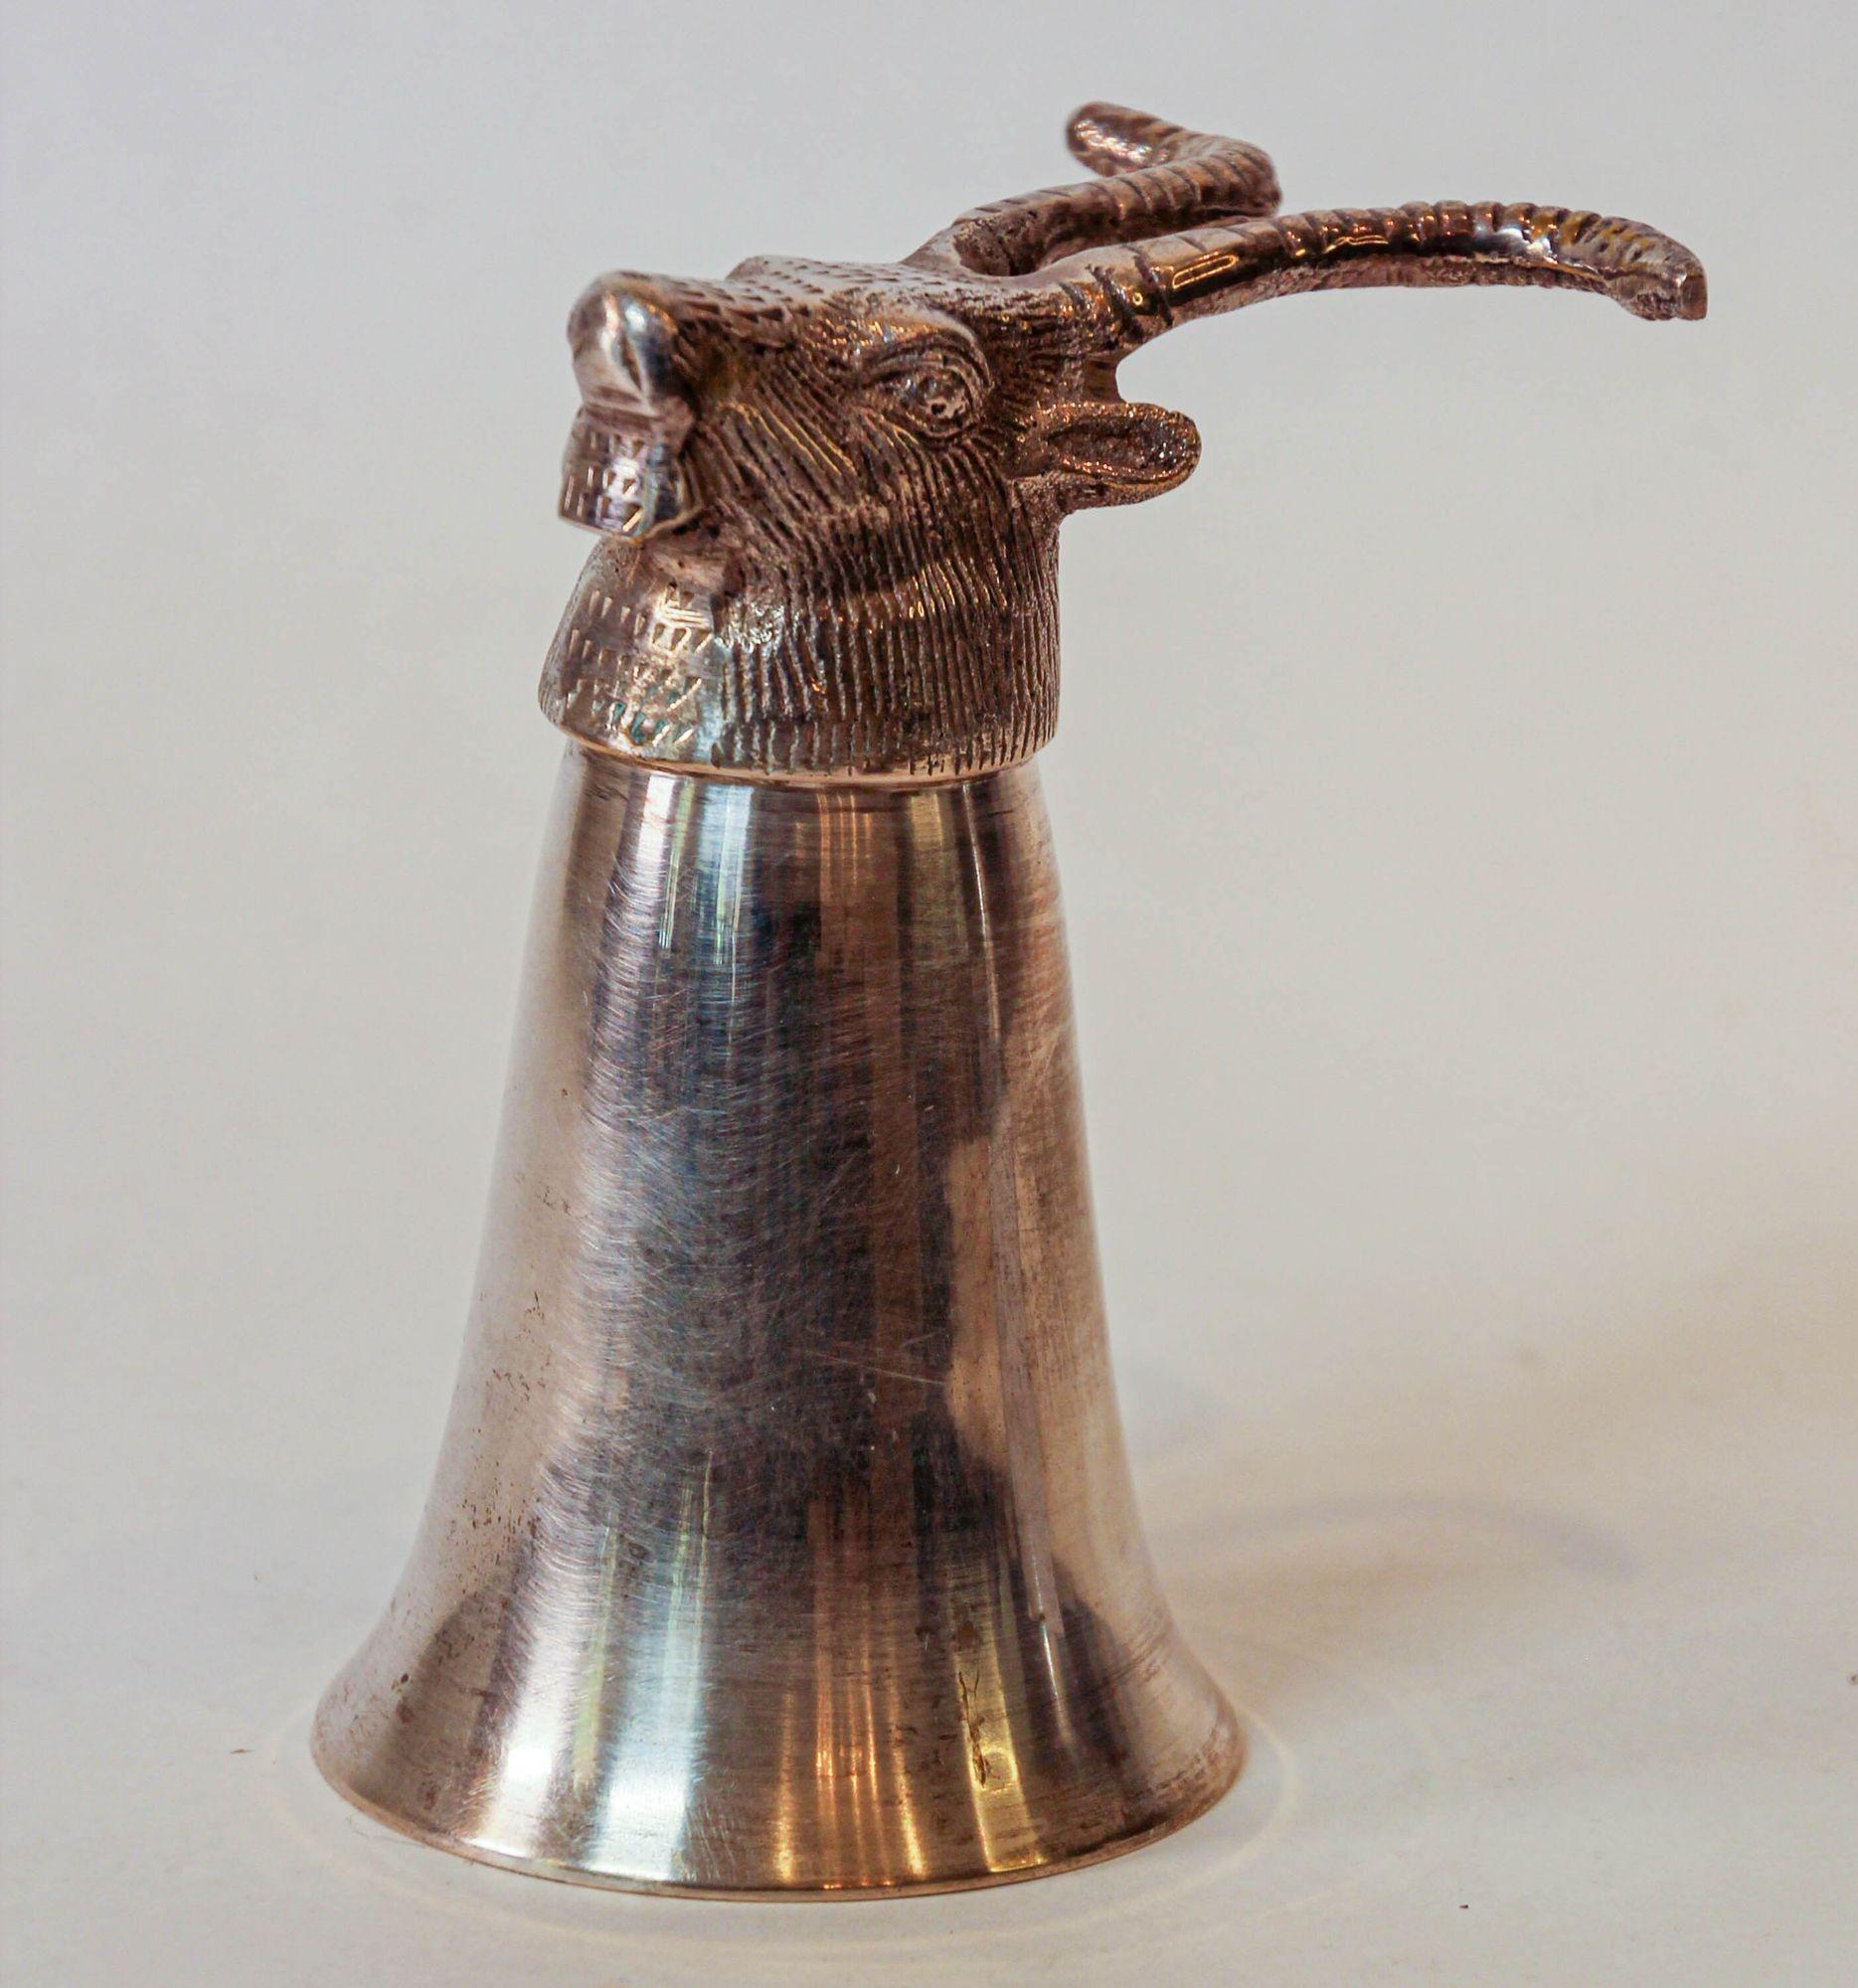 Silver Stirrup Cup Goblet Antelope Head Hunting Equestrian Barware Decor 1970s In Good Condition For Sale In North Hollywood, CA